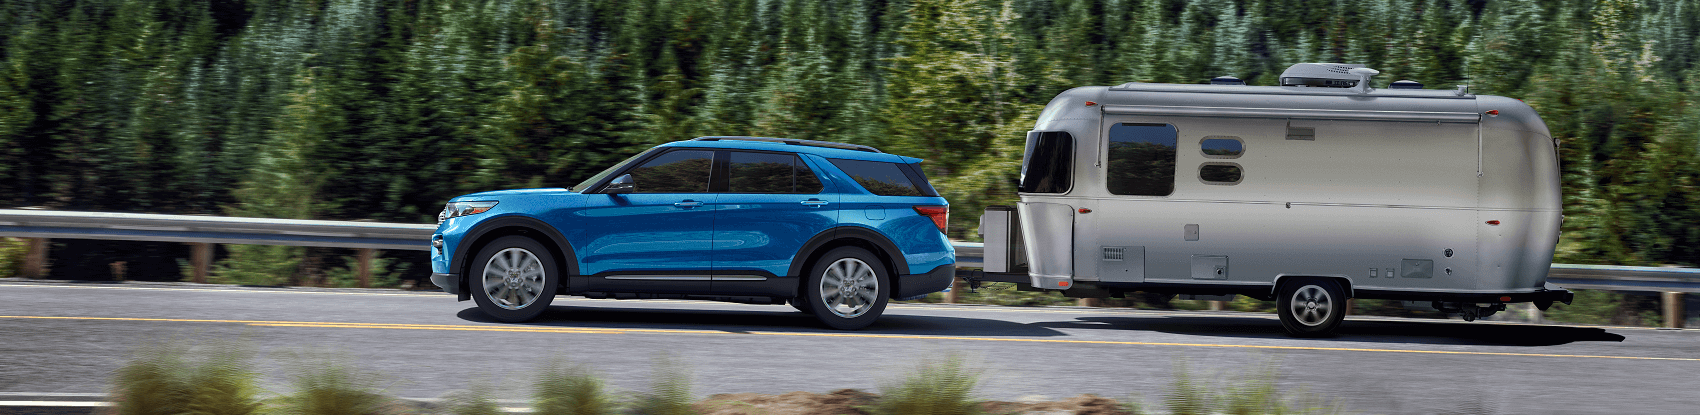 Ford Explorer Towing an airstream